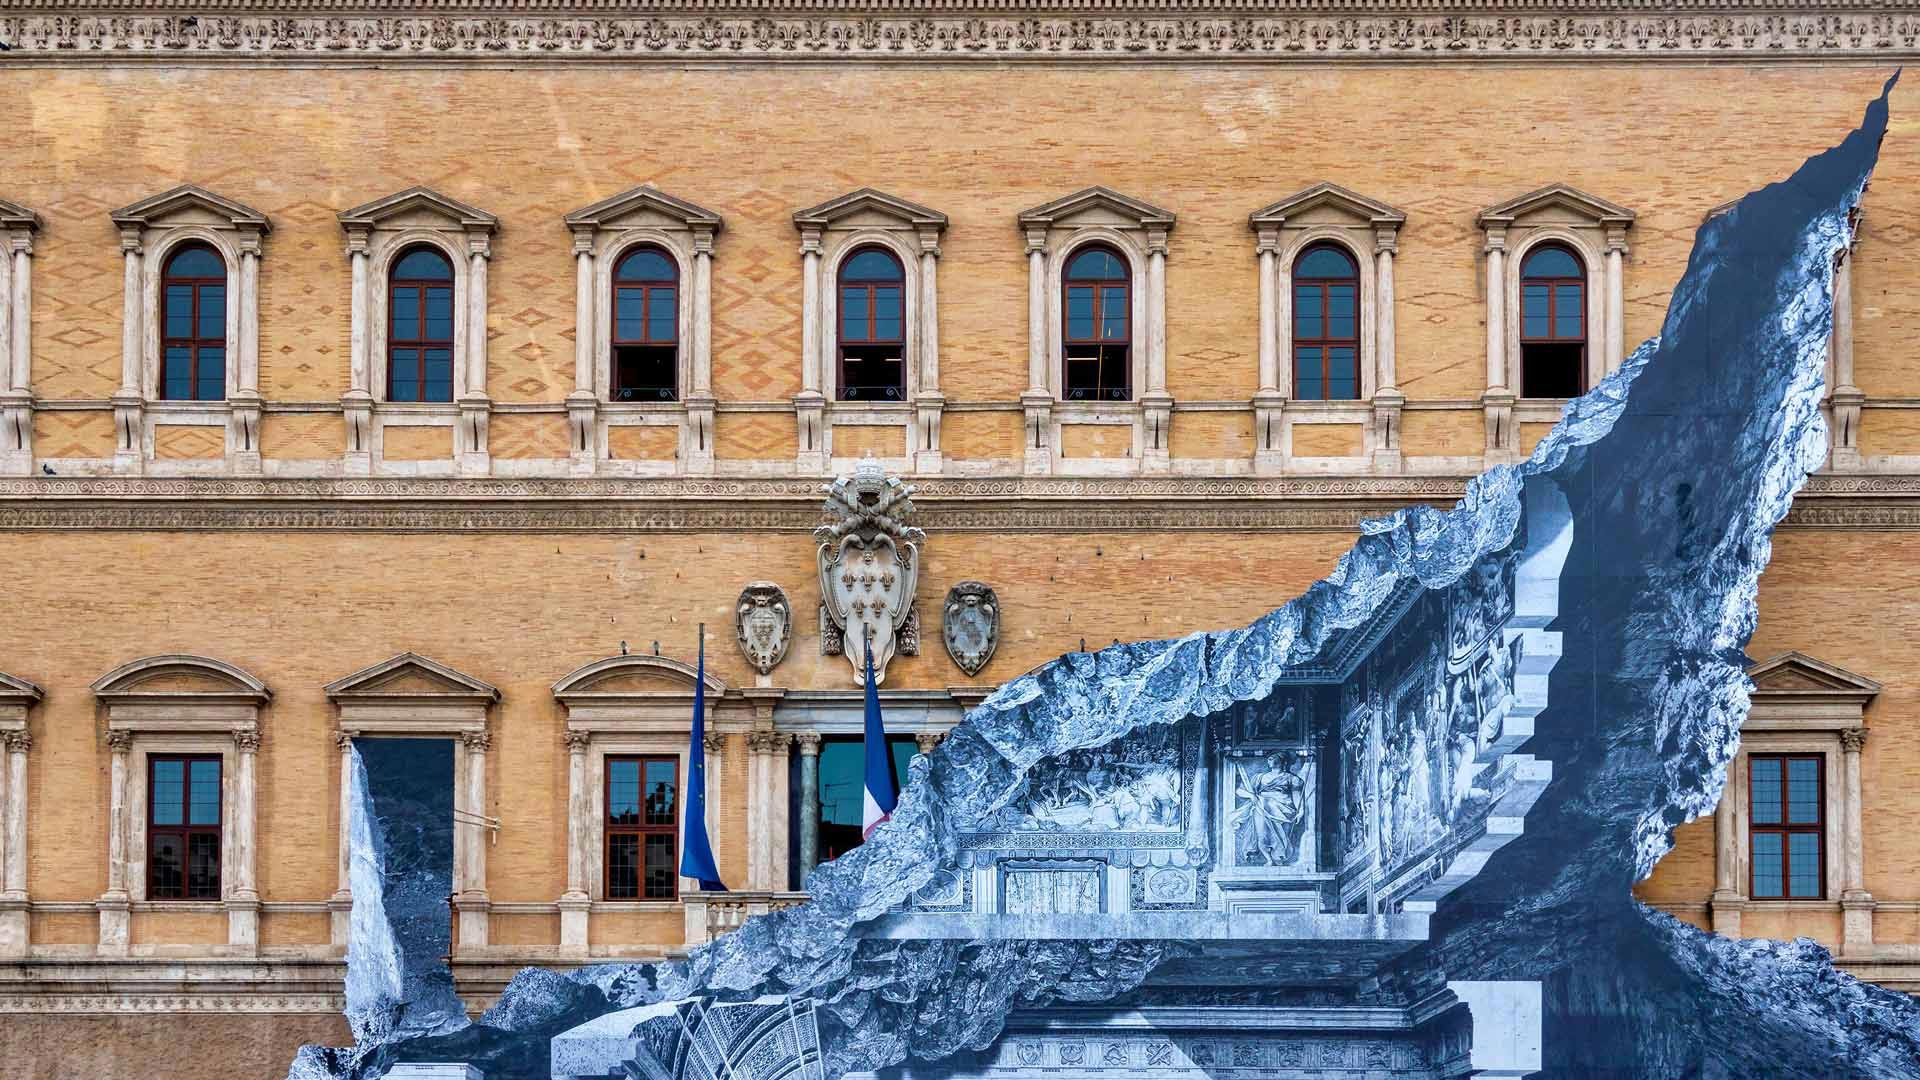 'Vanishing Point' by French street artist JR on the facade of Palazzo Farnese